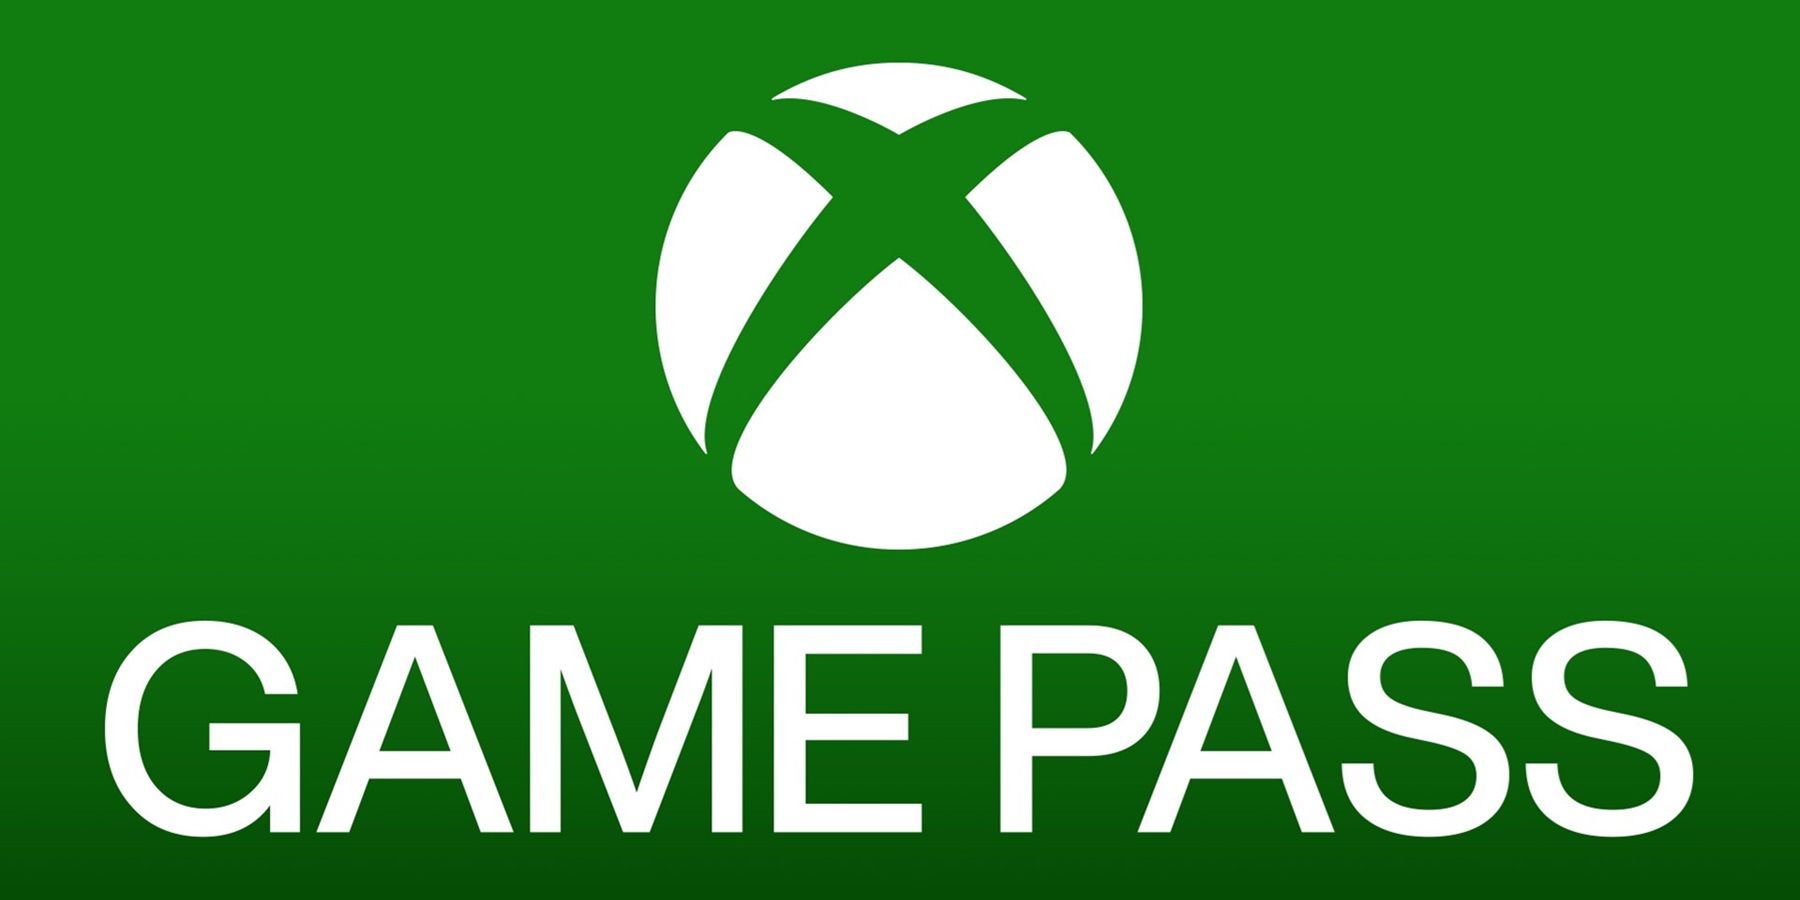 Xbox Series X games news release date update for Hellblade 2